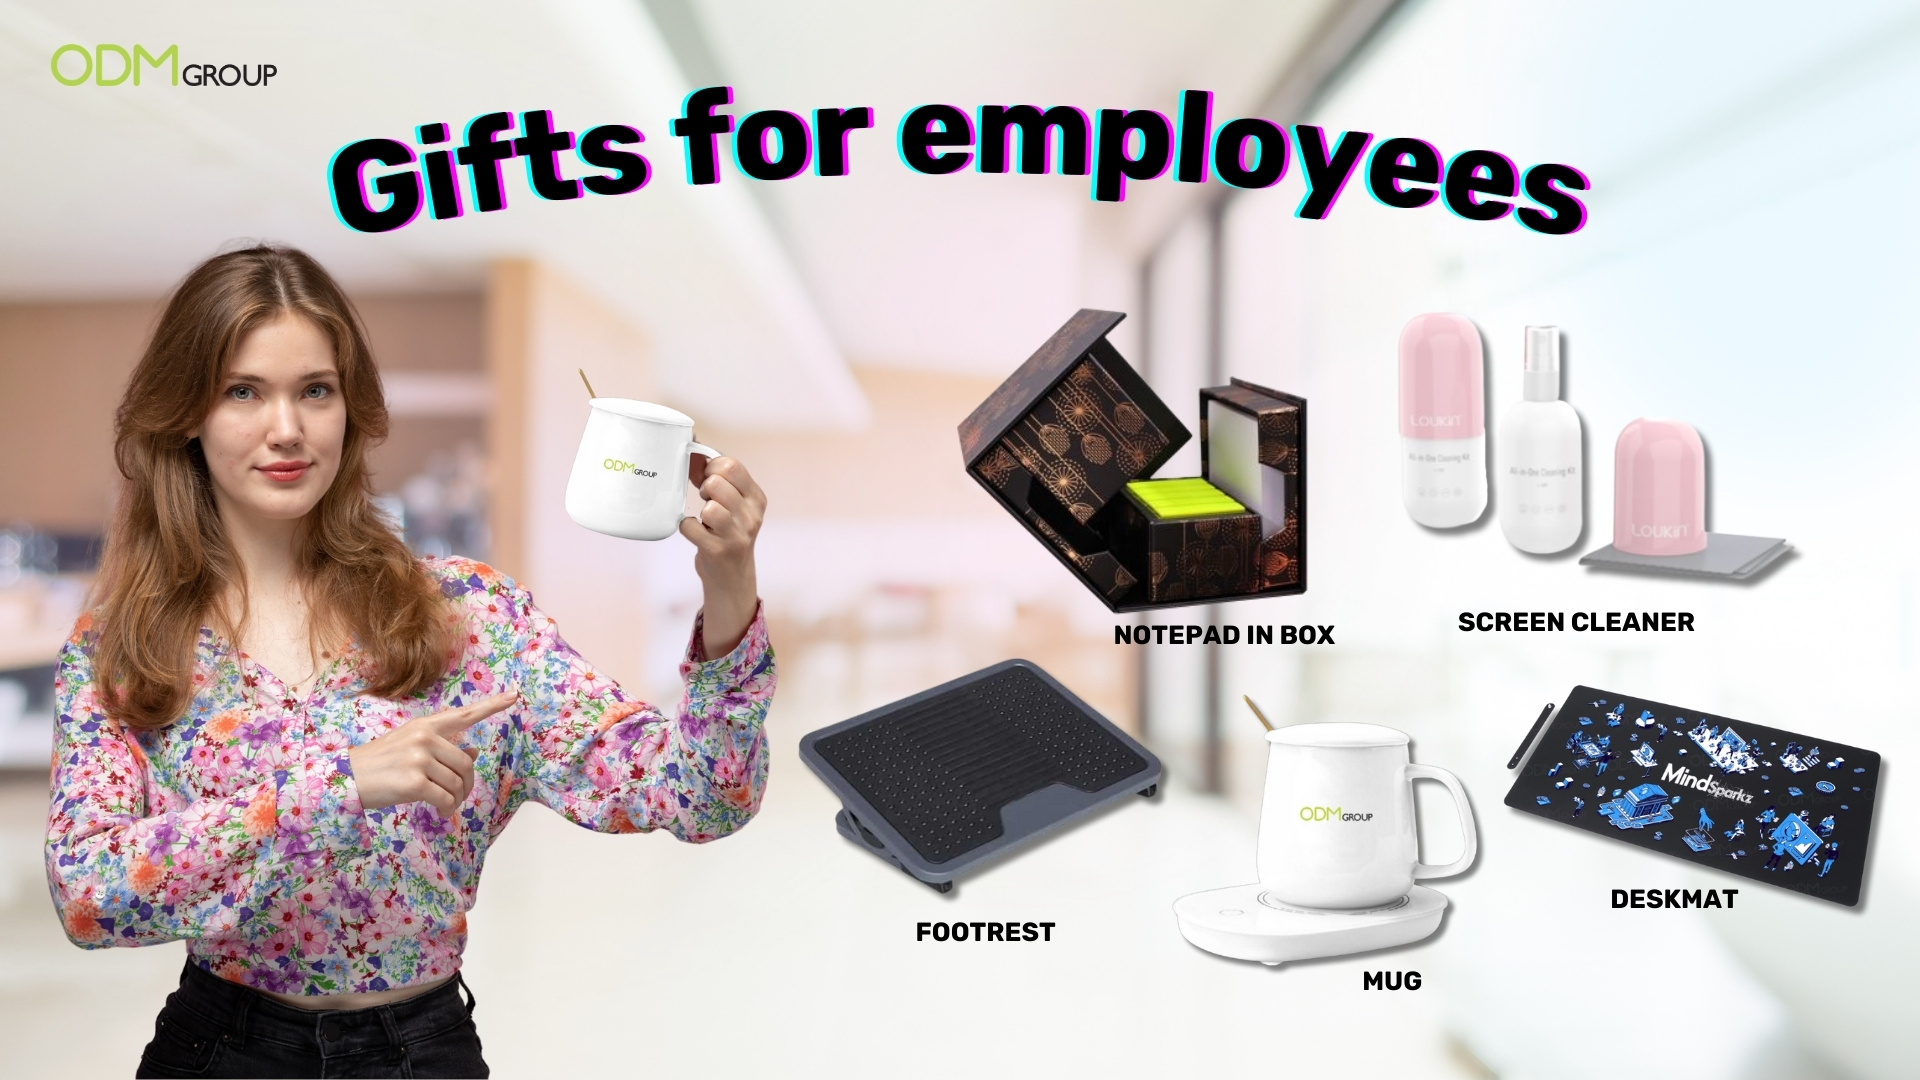 A woman holding a mug with other employee gift ideas like a footrest, desk mat, and screen cleaner displayed.